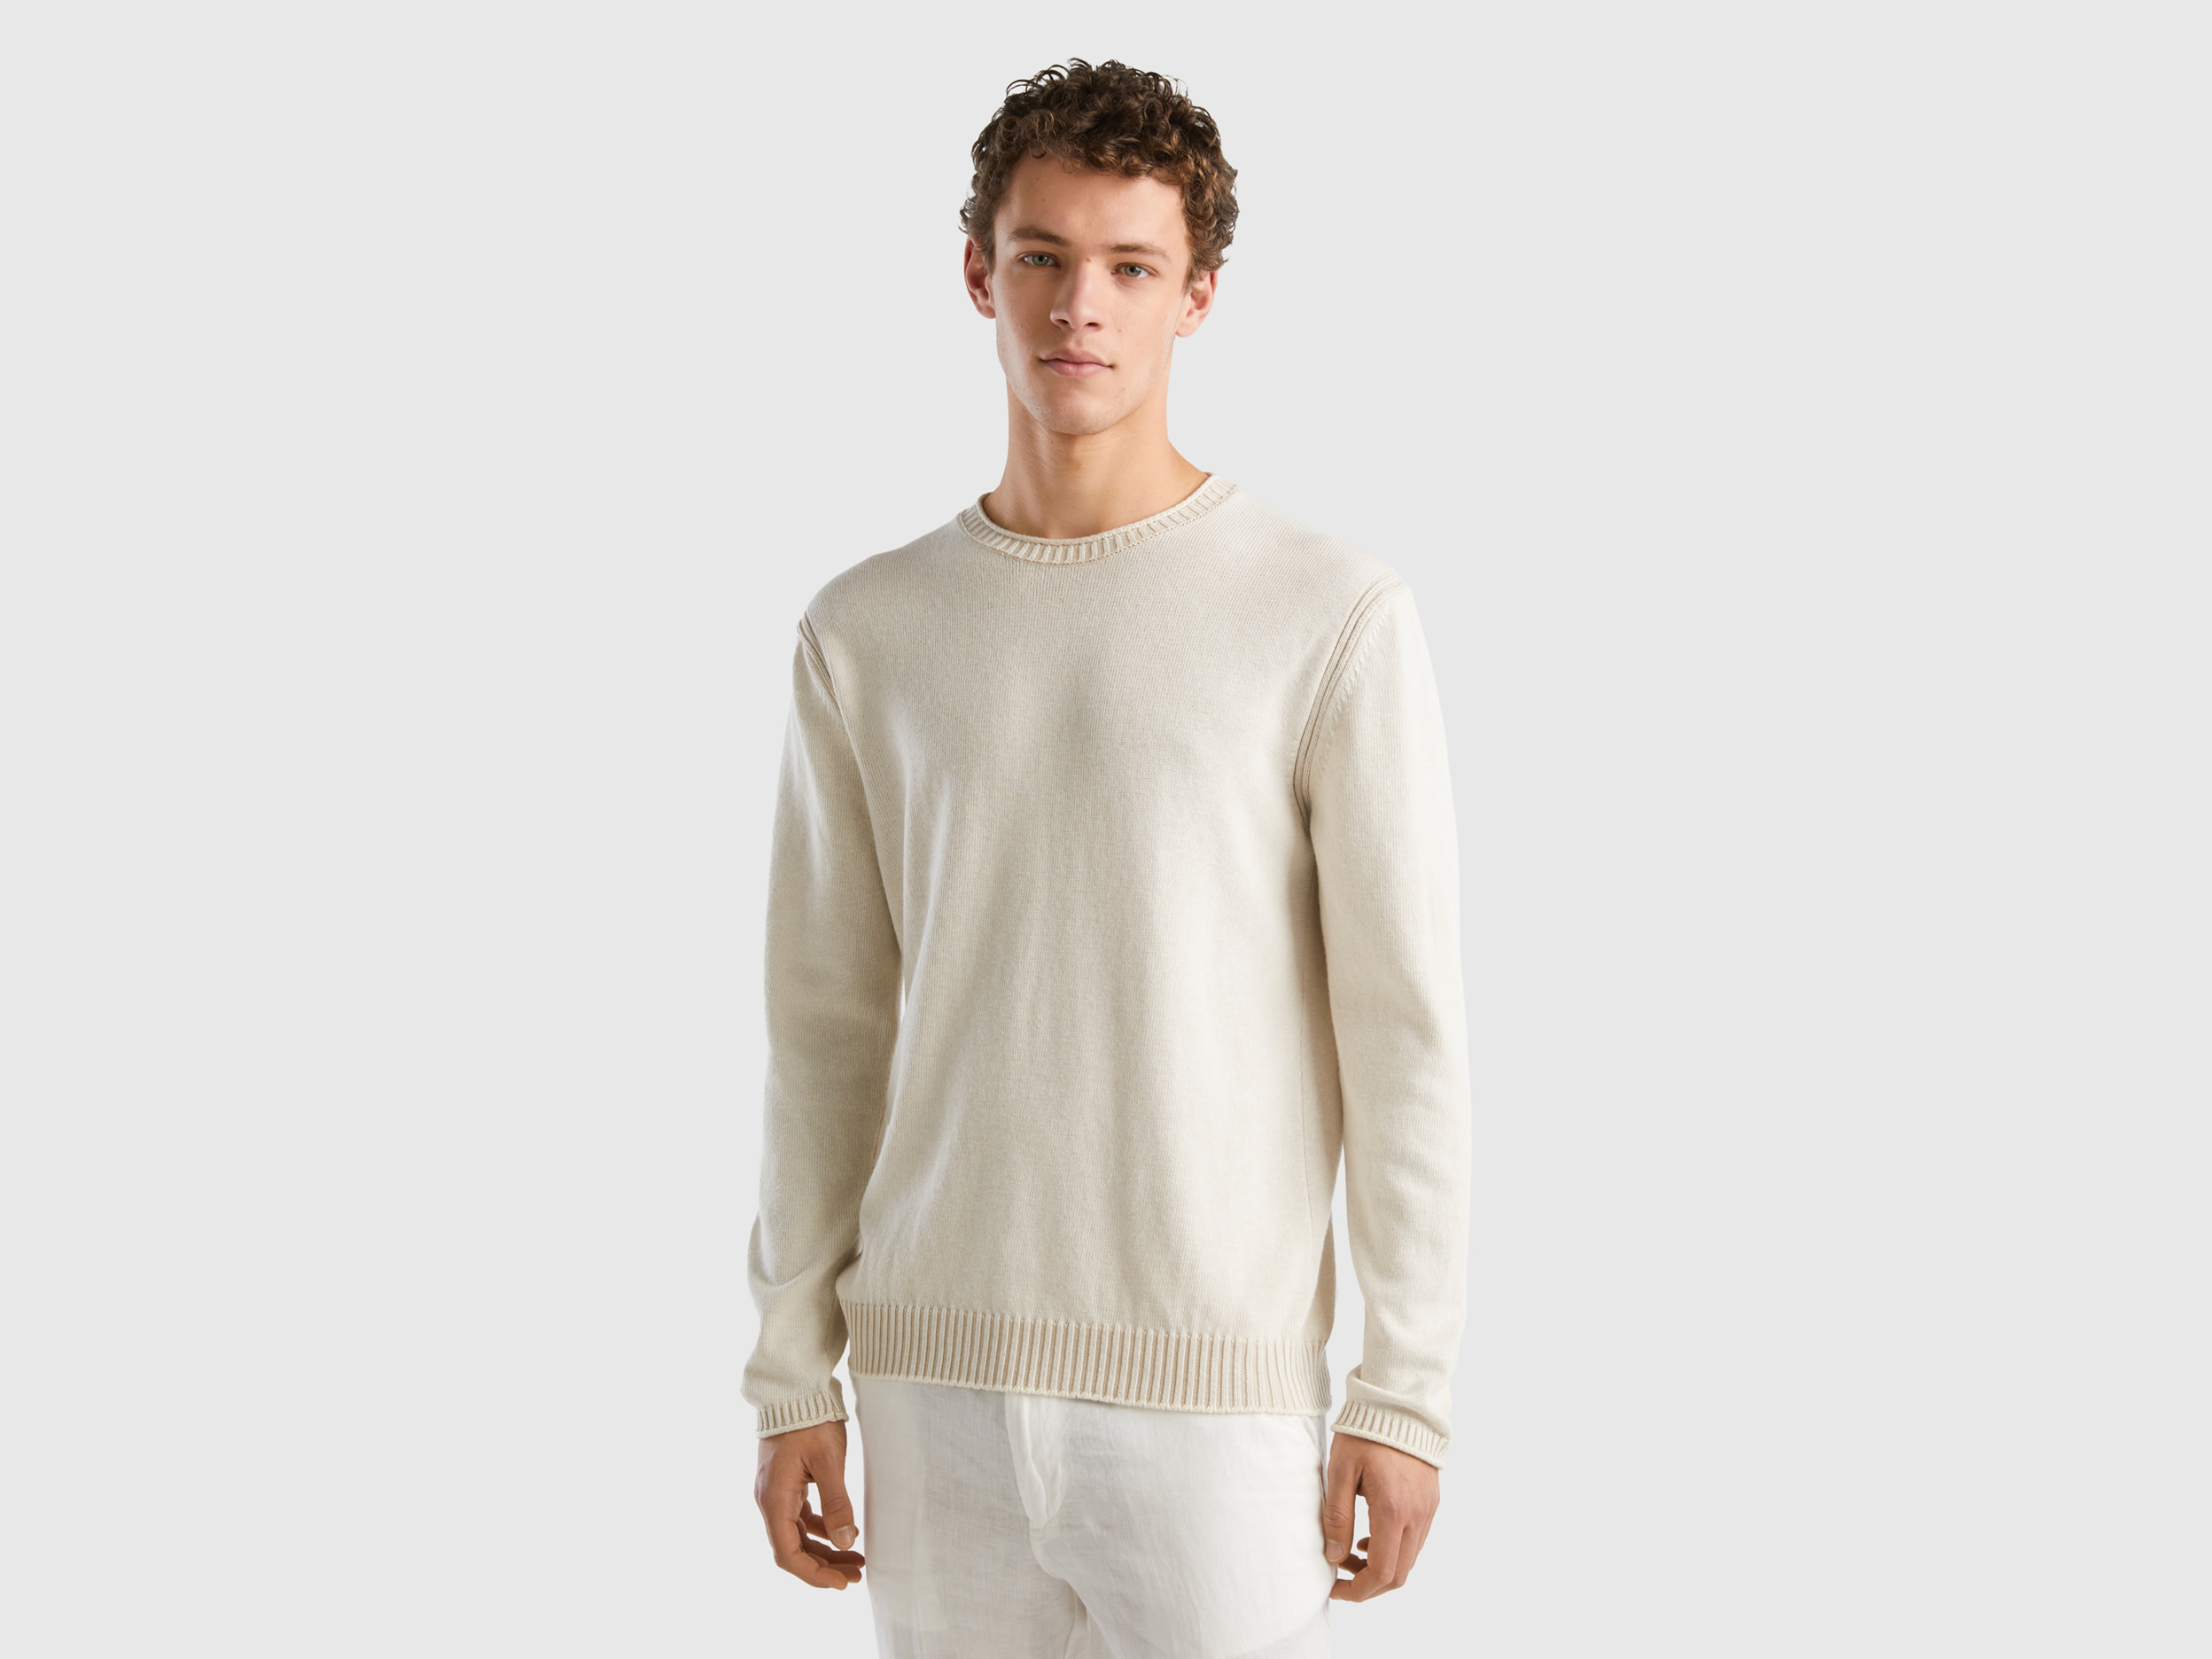 Image of Benetton, Sweater In Recycled Cotton Blend, size S, Creamy White, Men